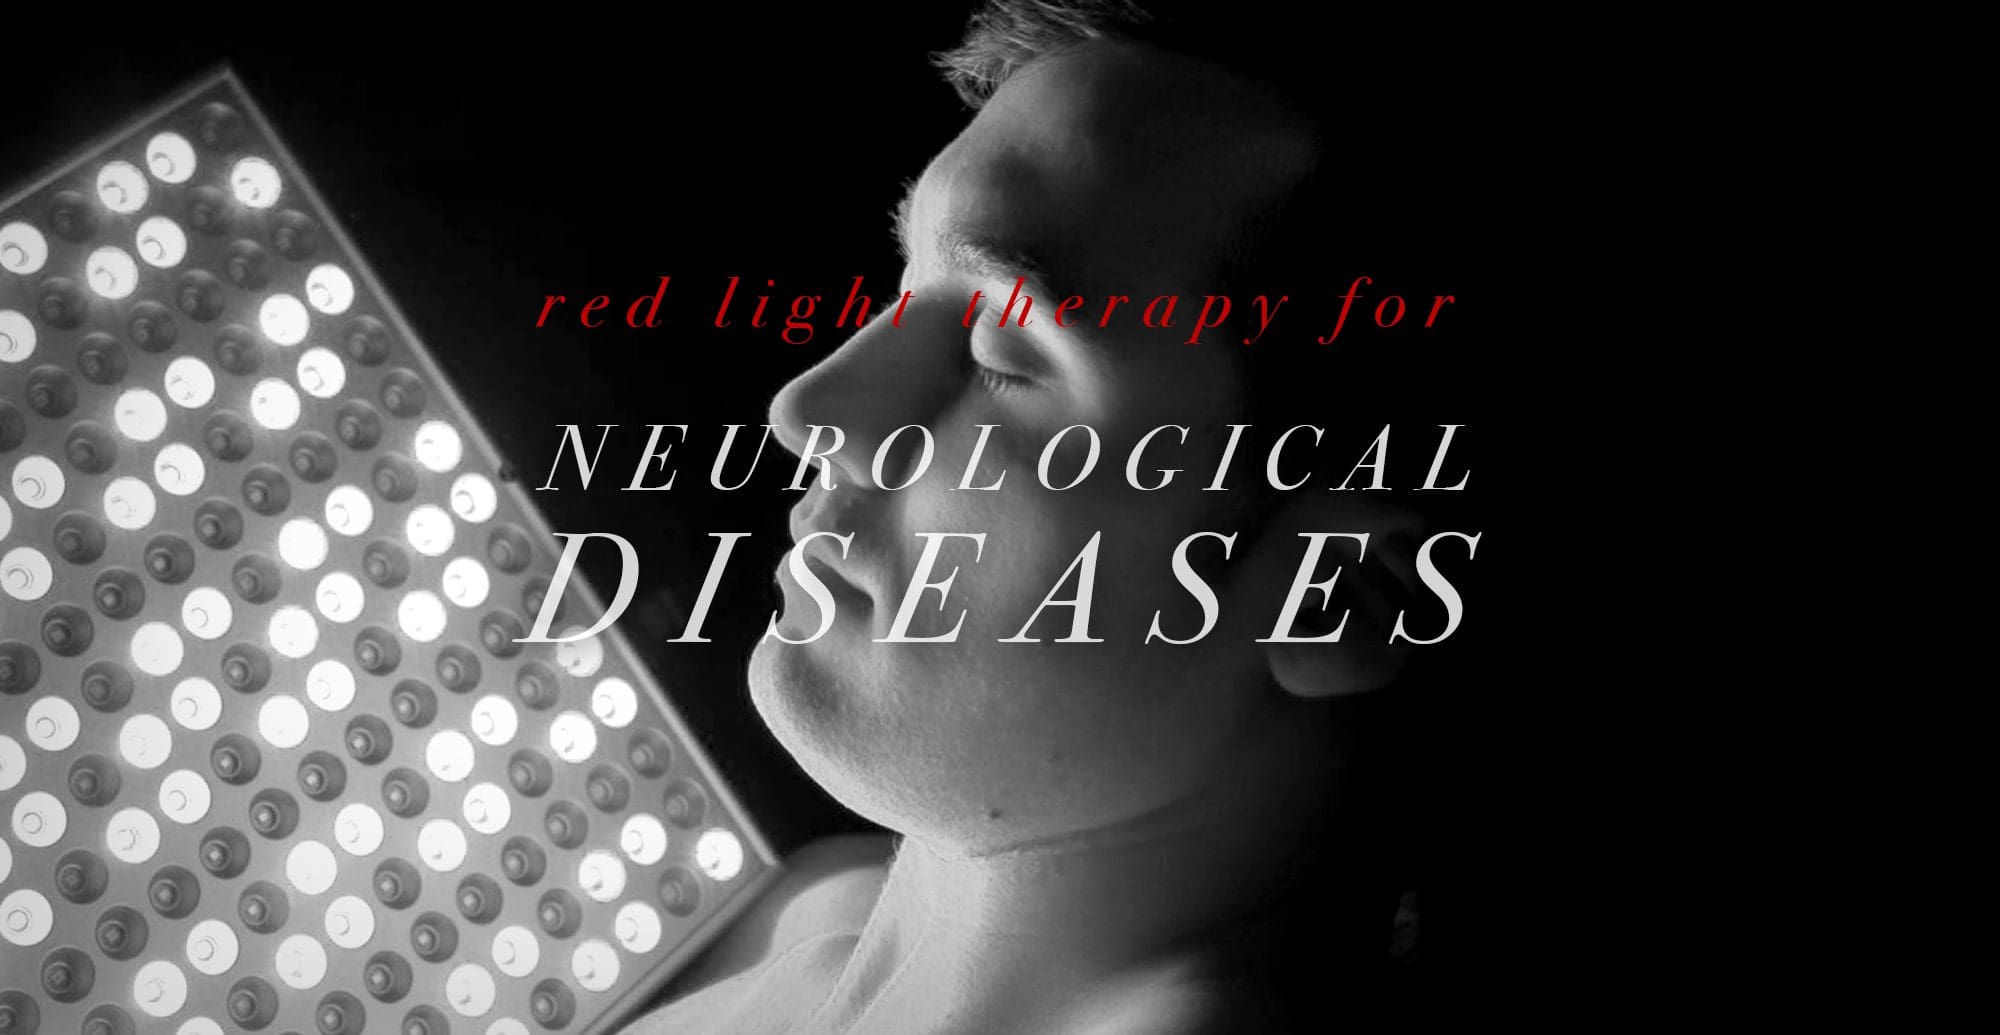 Red Light Therapy for Neurological Diseases | El Paso, TX Chiropractor